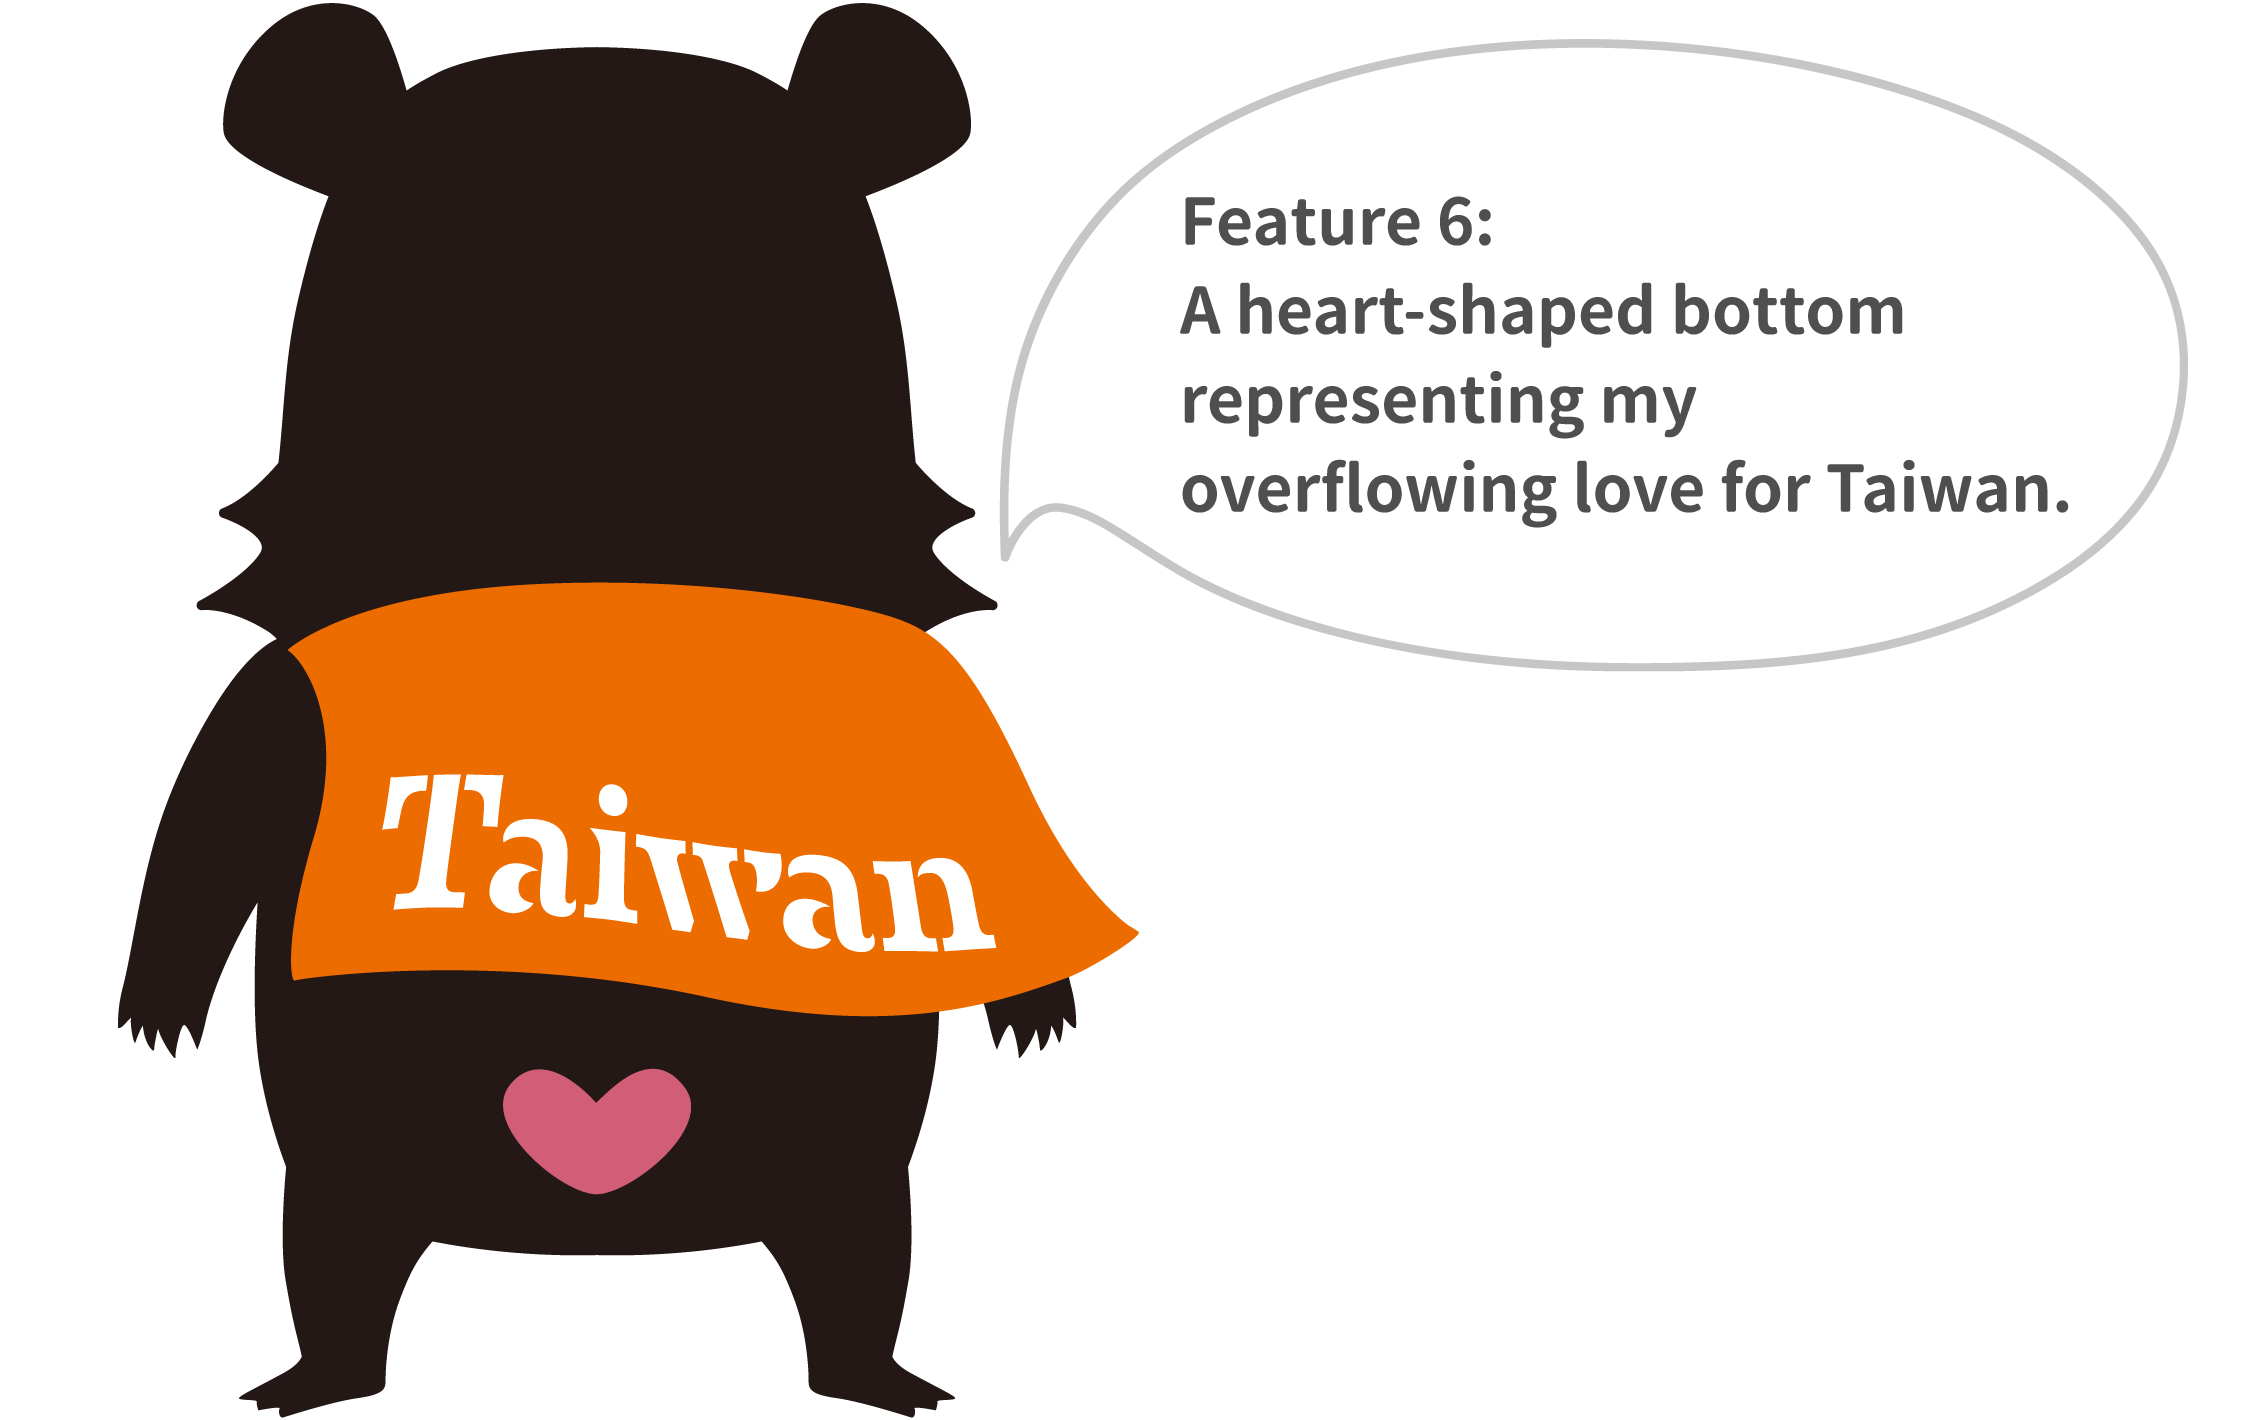 Feature 6:
A heart-shaped bottom representing my overflowing love for Taiwan.
